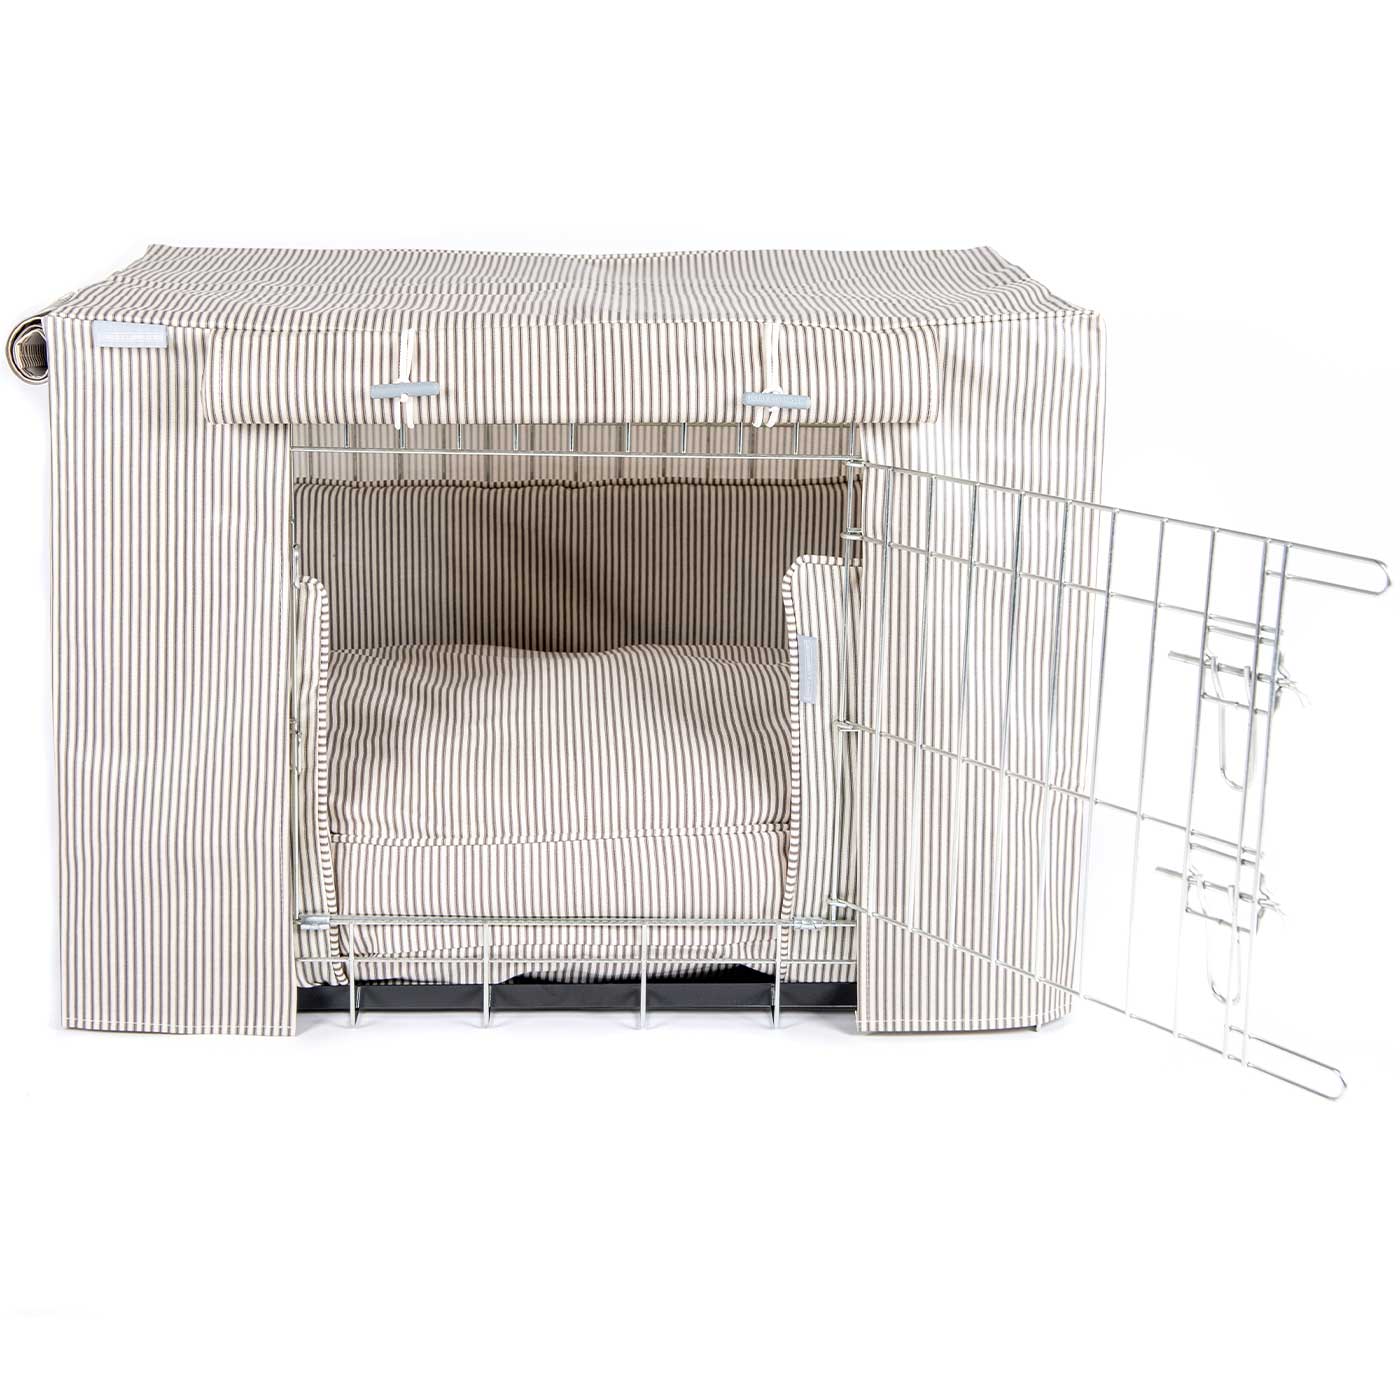 Luxury Heavy Duty Dog Crate, In Stunning Regency Stripe Oil Cloth Crate Set, The Perfect Dog Crate Set For Building The Ultimate Pet Den! Dog Crate Cover Available To Personalise at Lords & Labradors